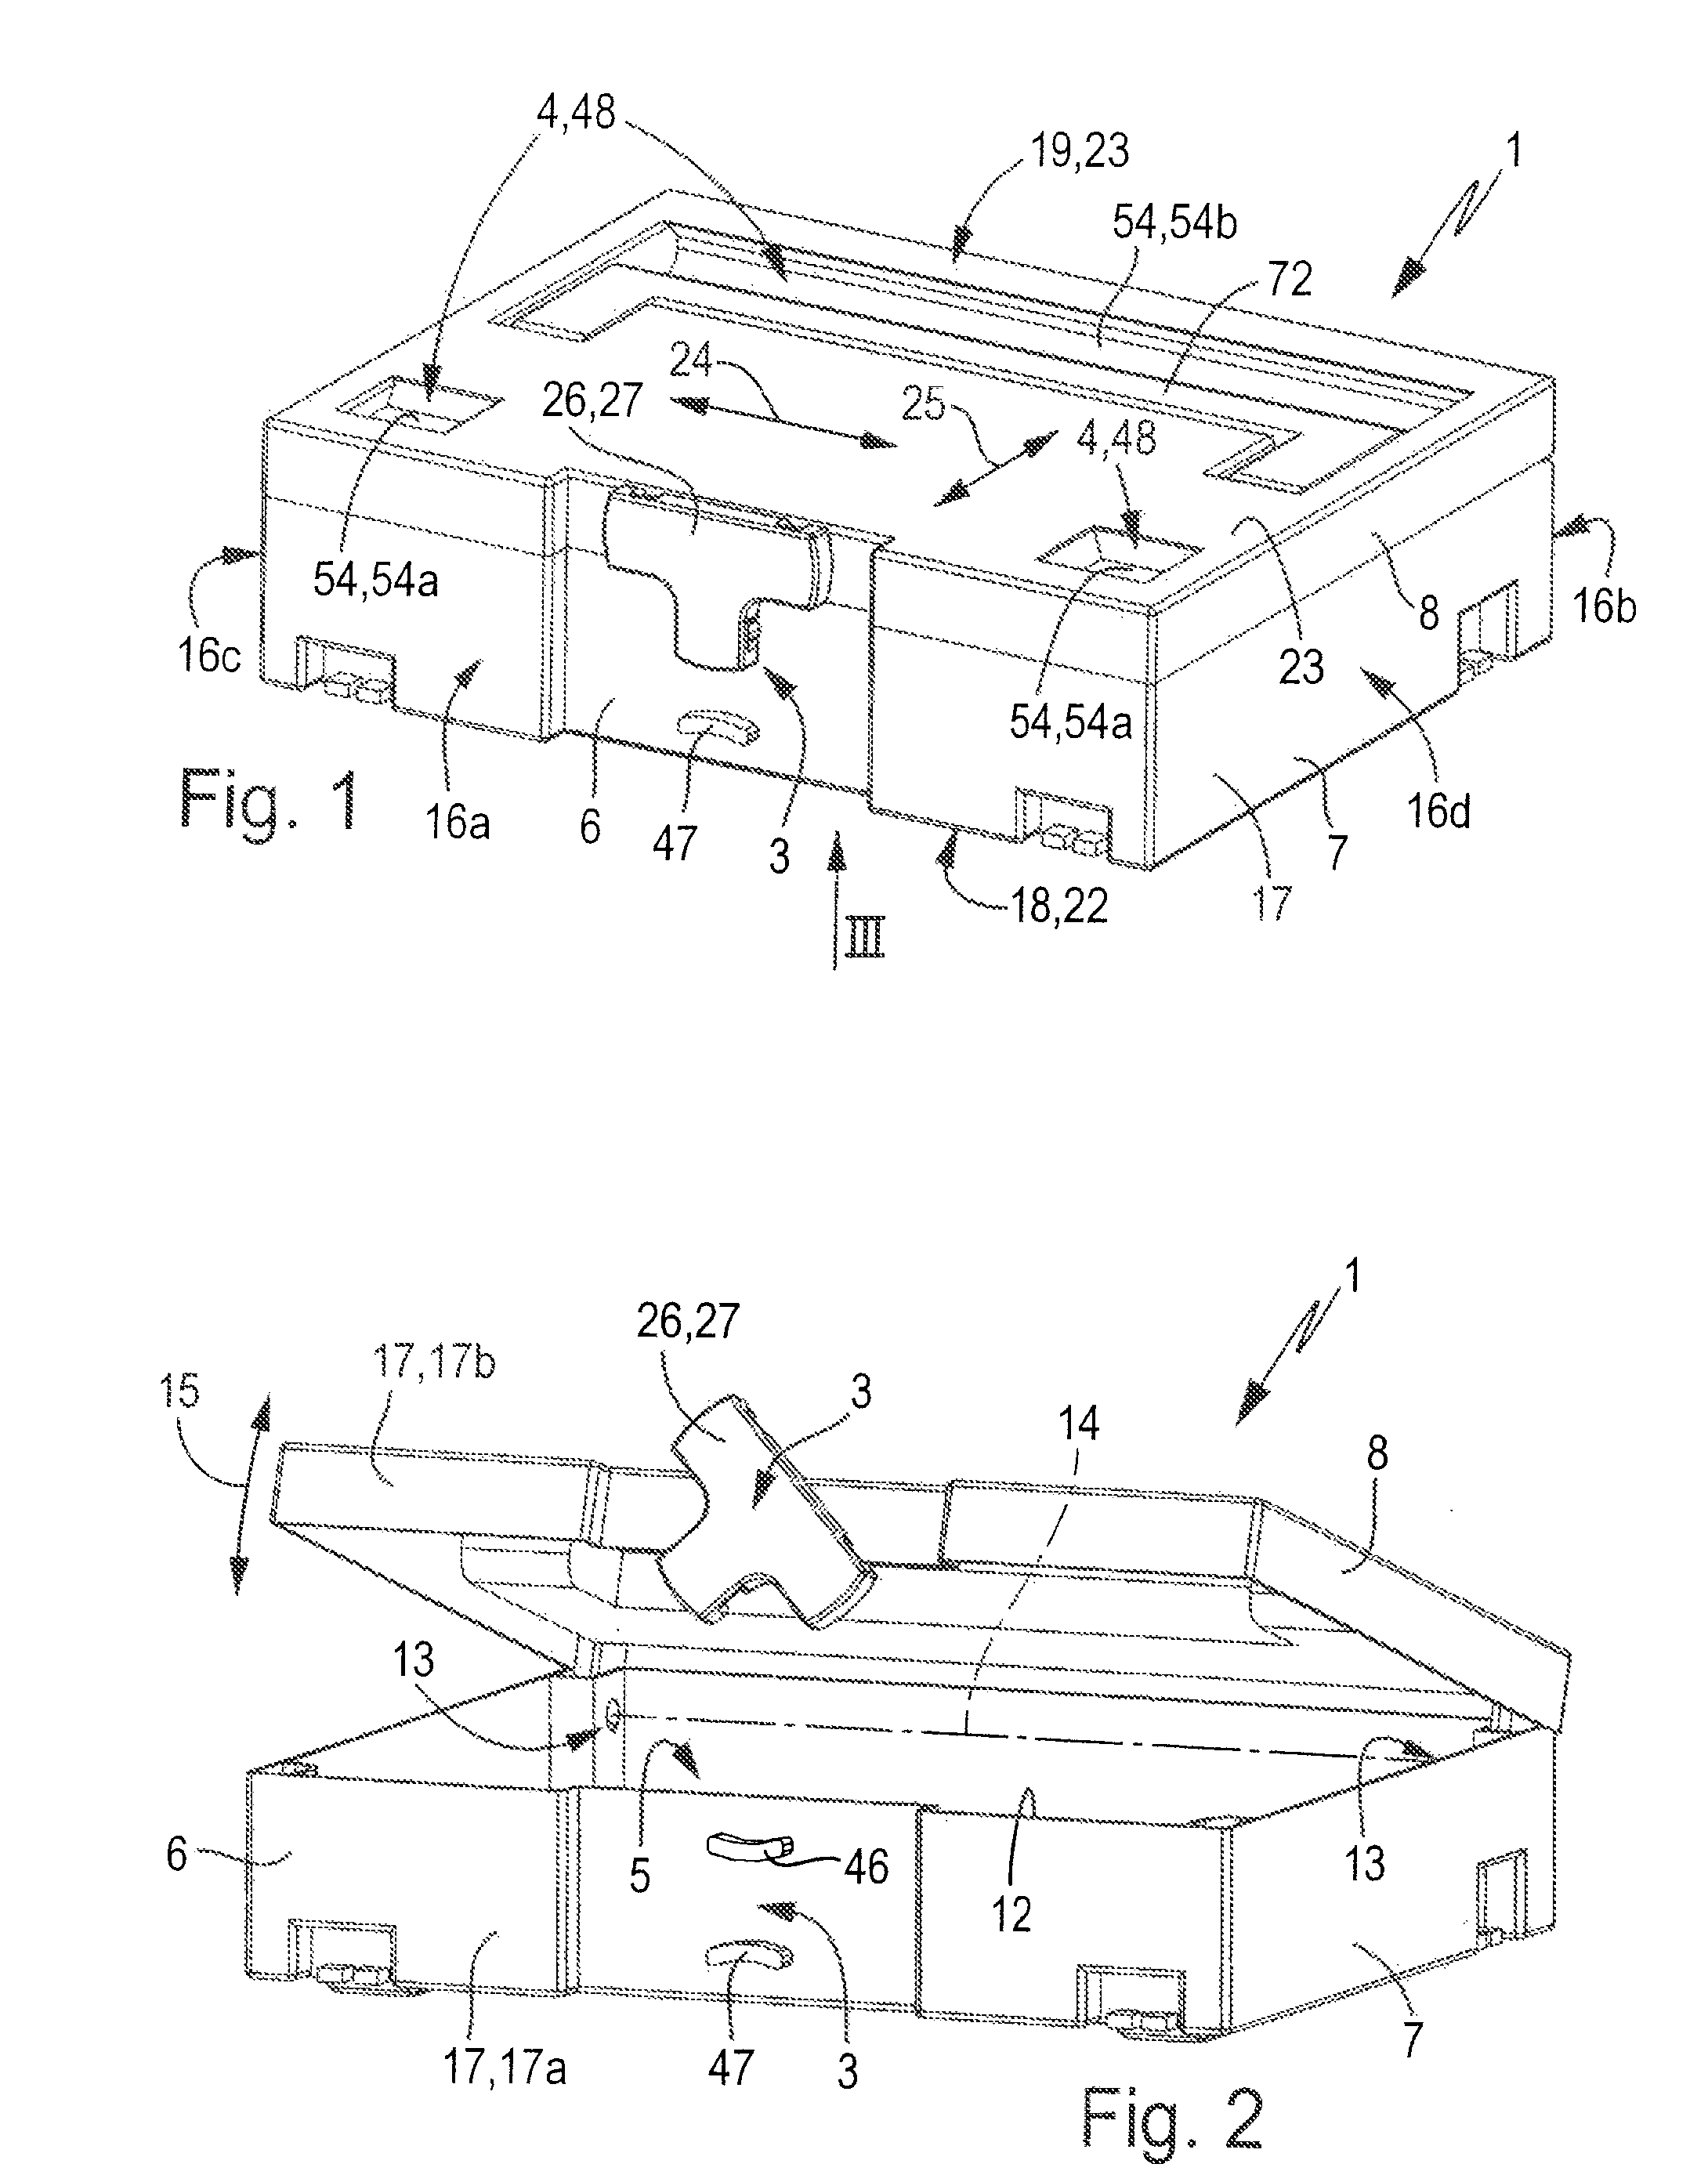 Stackable container assembly with reciprocal locking of the stacked containers